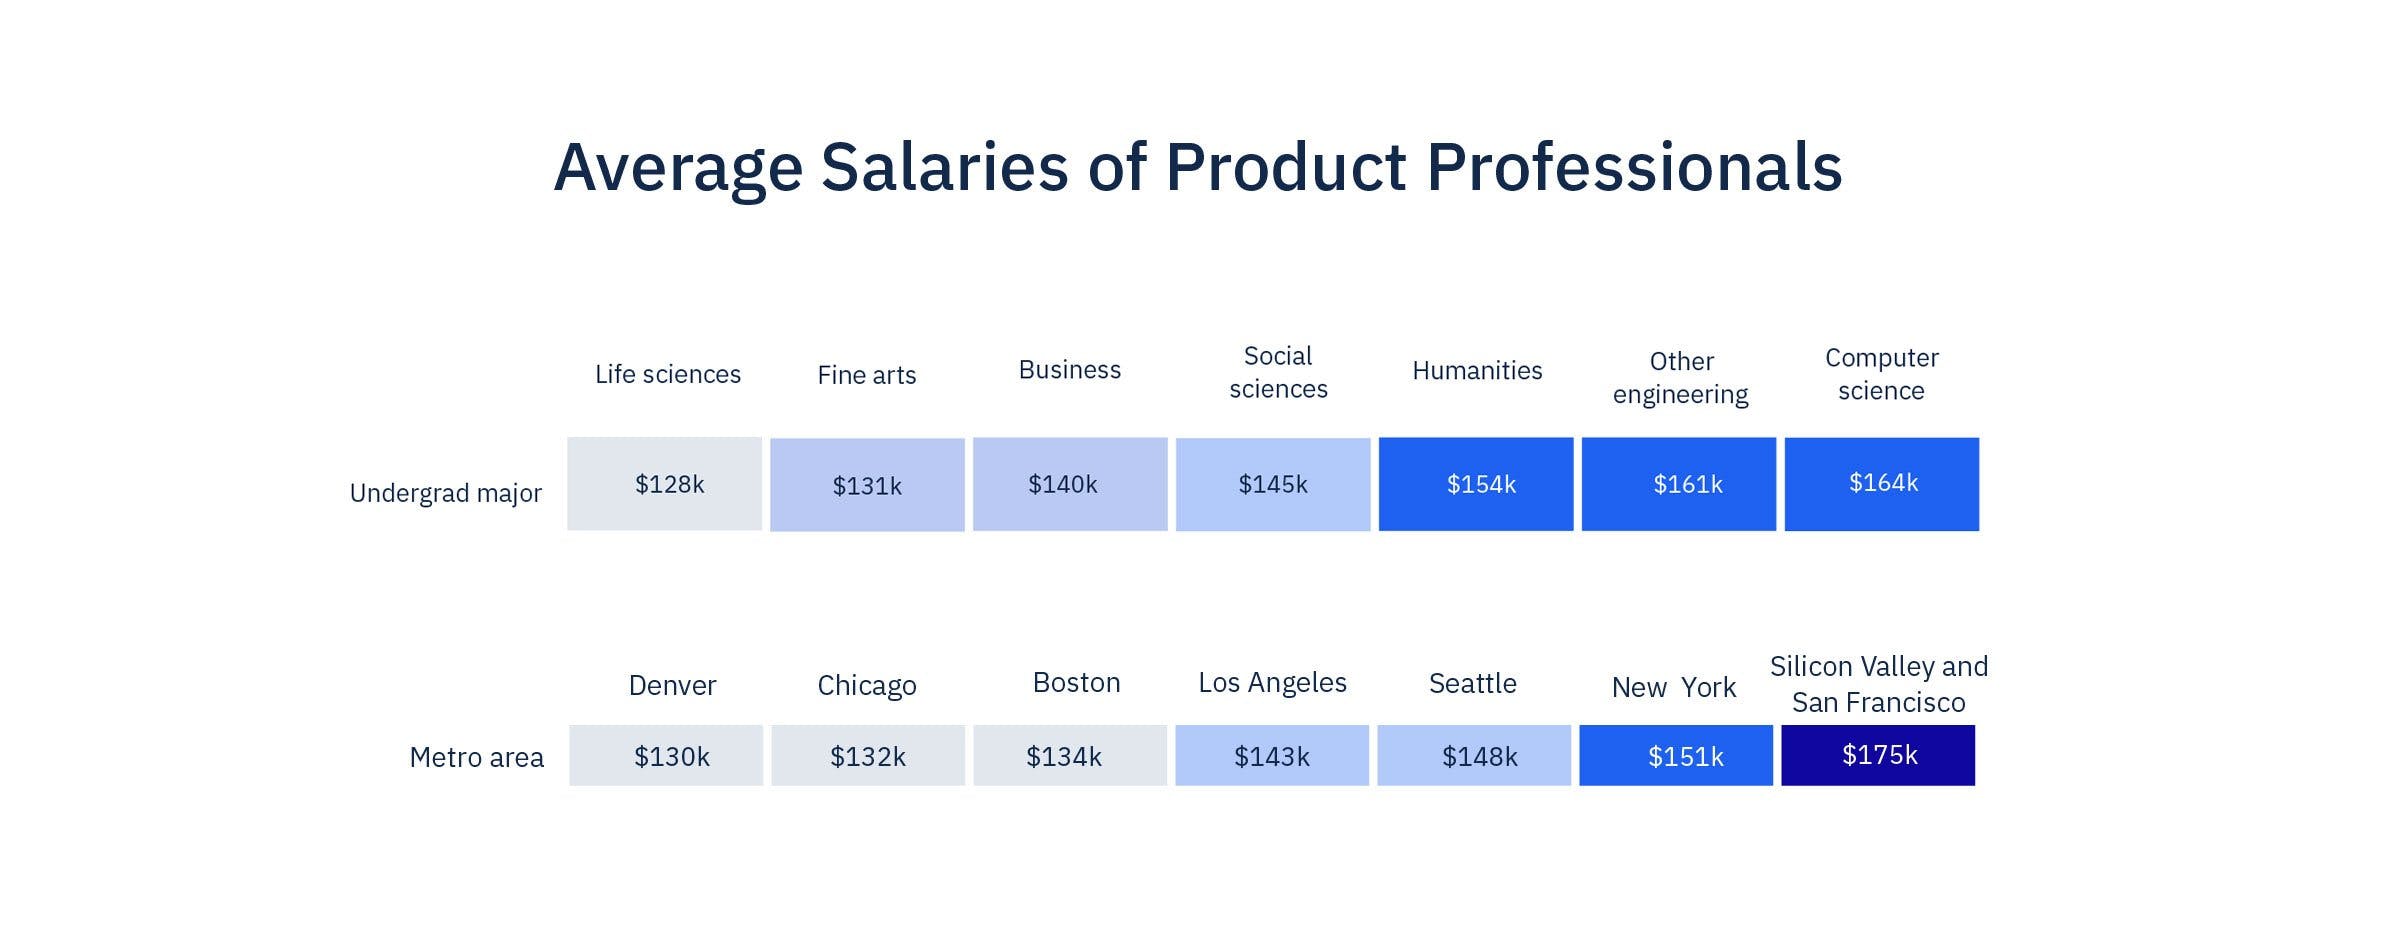 Average salaries of product professionals by undergrad major and metro region